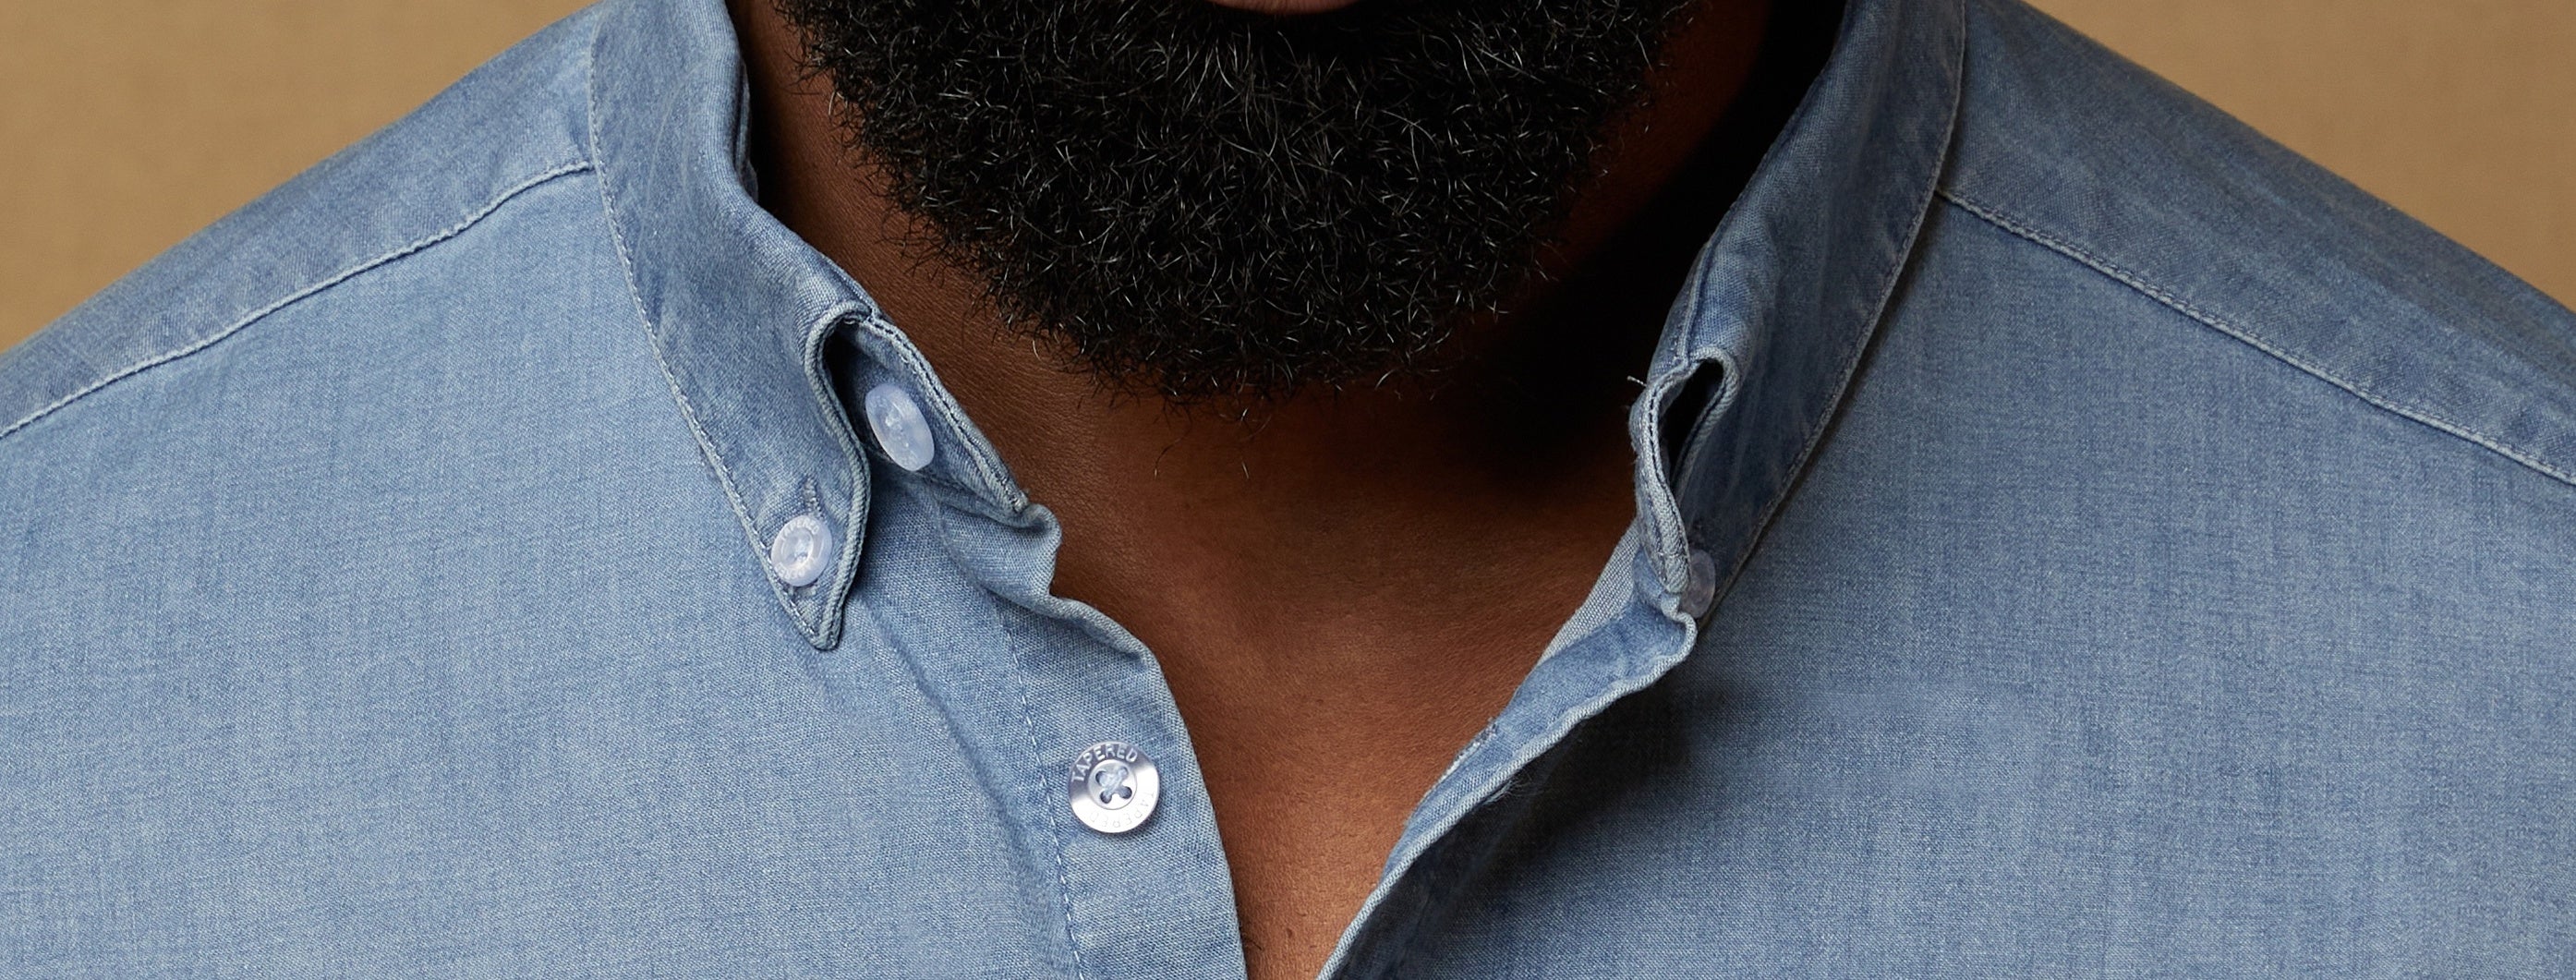 Button Up vs Button Down: What's the Difference?